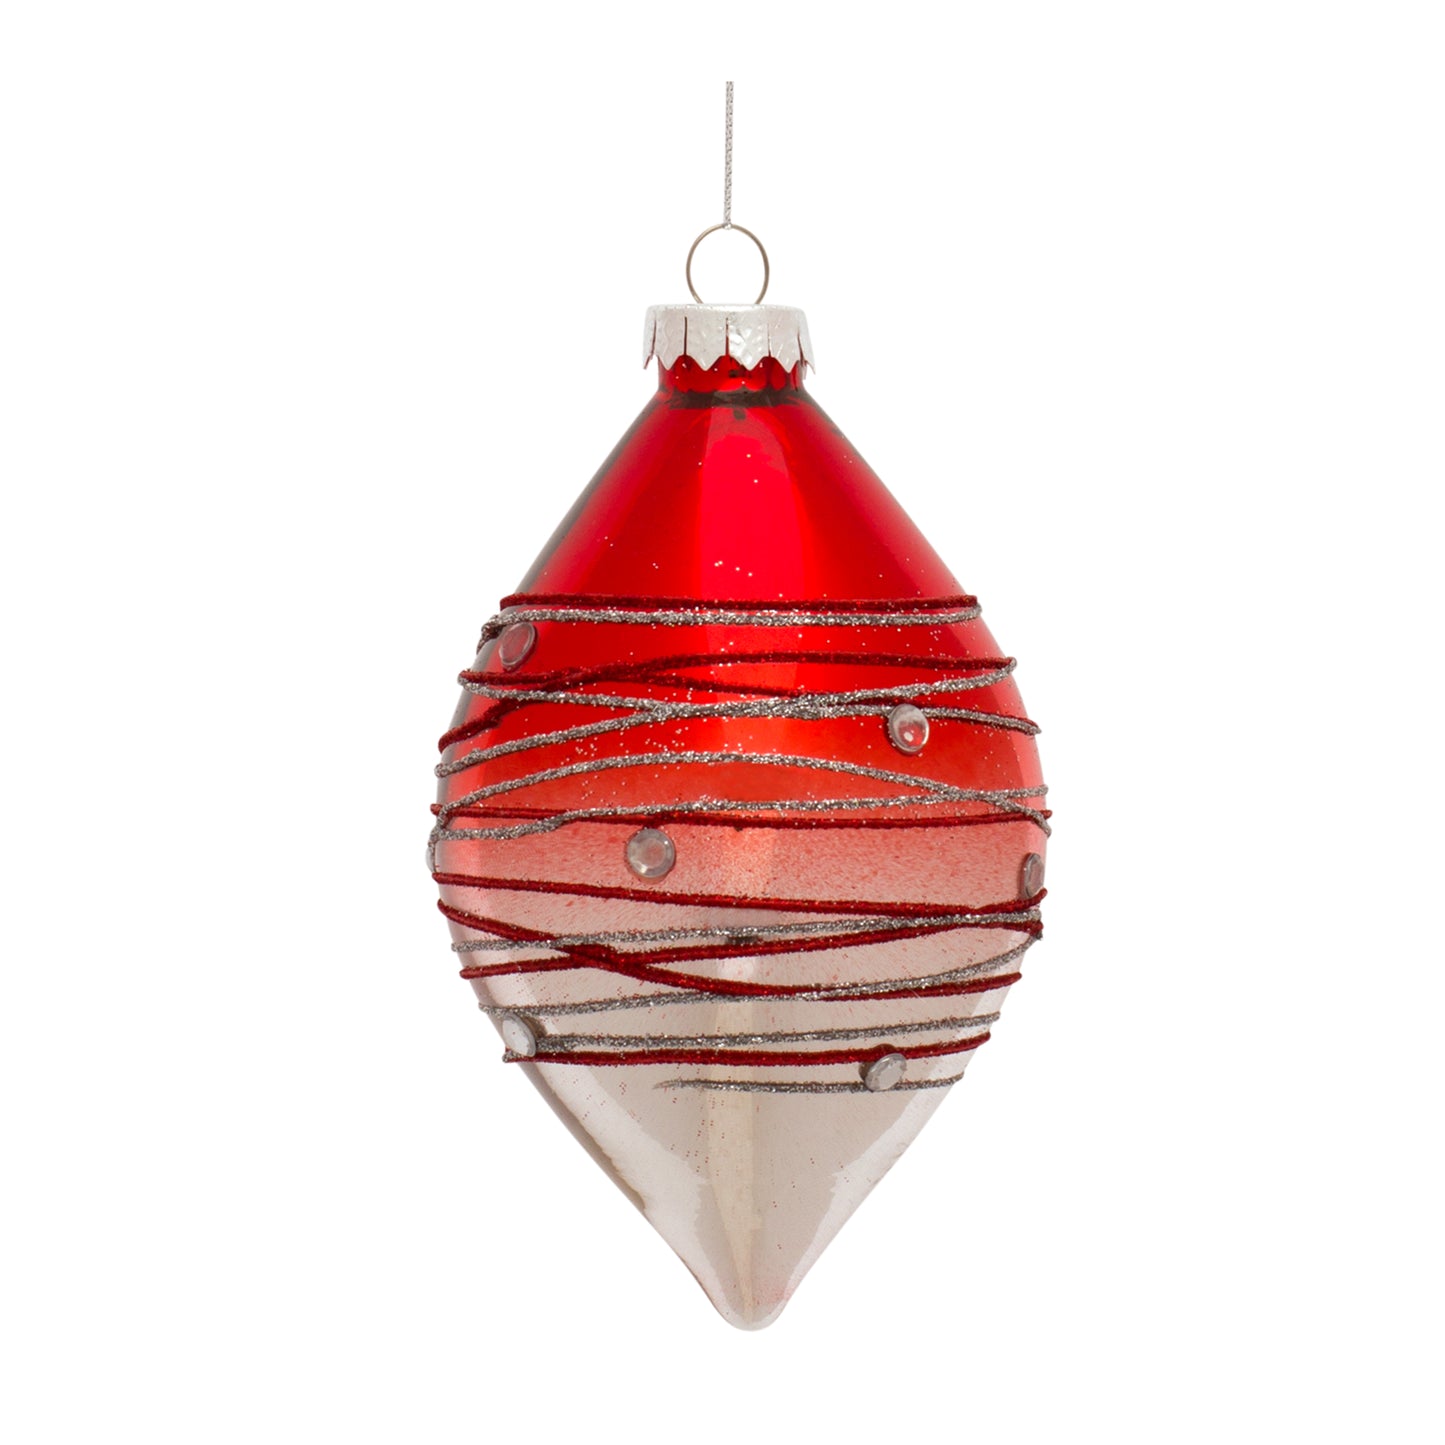 Red Elegance Ball, Finial, or Onion Glass Ornament